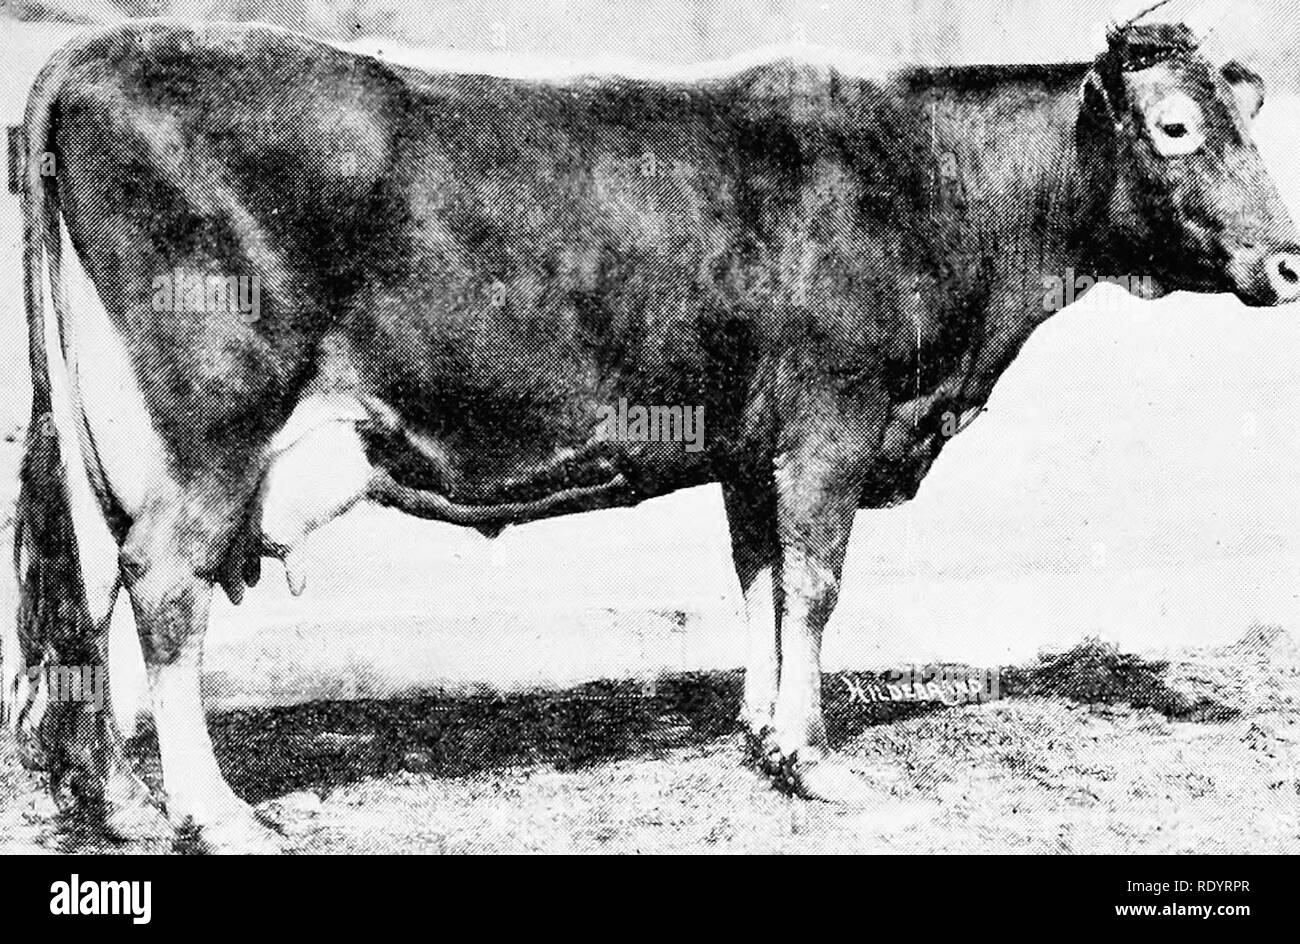 . The Guernsey breed. Guernsey cattle. The Guernsey Bkeiu 167 in this book, though, of cfturse, all would a,L;ree that the piili- lication of such records is the nmst important factor in the development of the breed today. To show the deelopmcnt of the work, however, the followin.t;- list is Rien of the cows that once were leaders in the several classes:. Murne Cowan 19597—A R. 1906—yearly record, J4,008 pounds m pounds fat. Class A—Cows Over Five Years of Age. Pounds milk 1901 (;lenwooil Gnd VI 9113, A. R. 1 12,183.33 1903 Charmantc of the Cron 1444J, A. R. 74 11,S74.08 1904 Imp. Haves Rosi Stock Photo